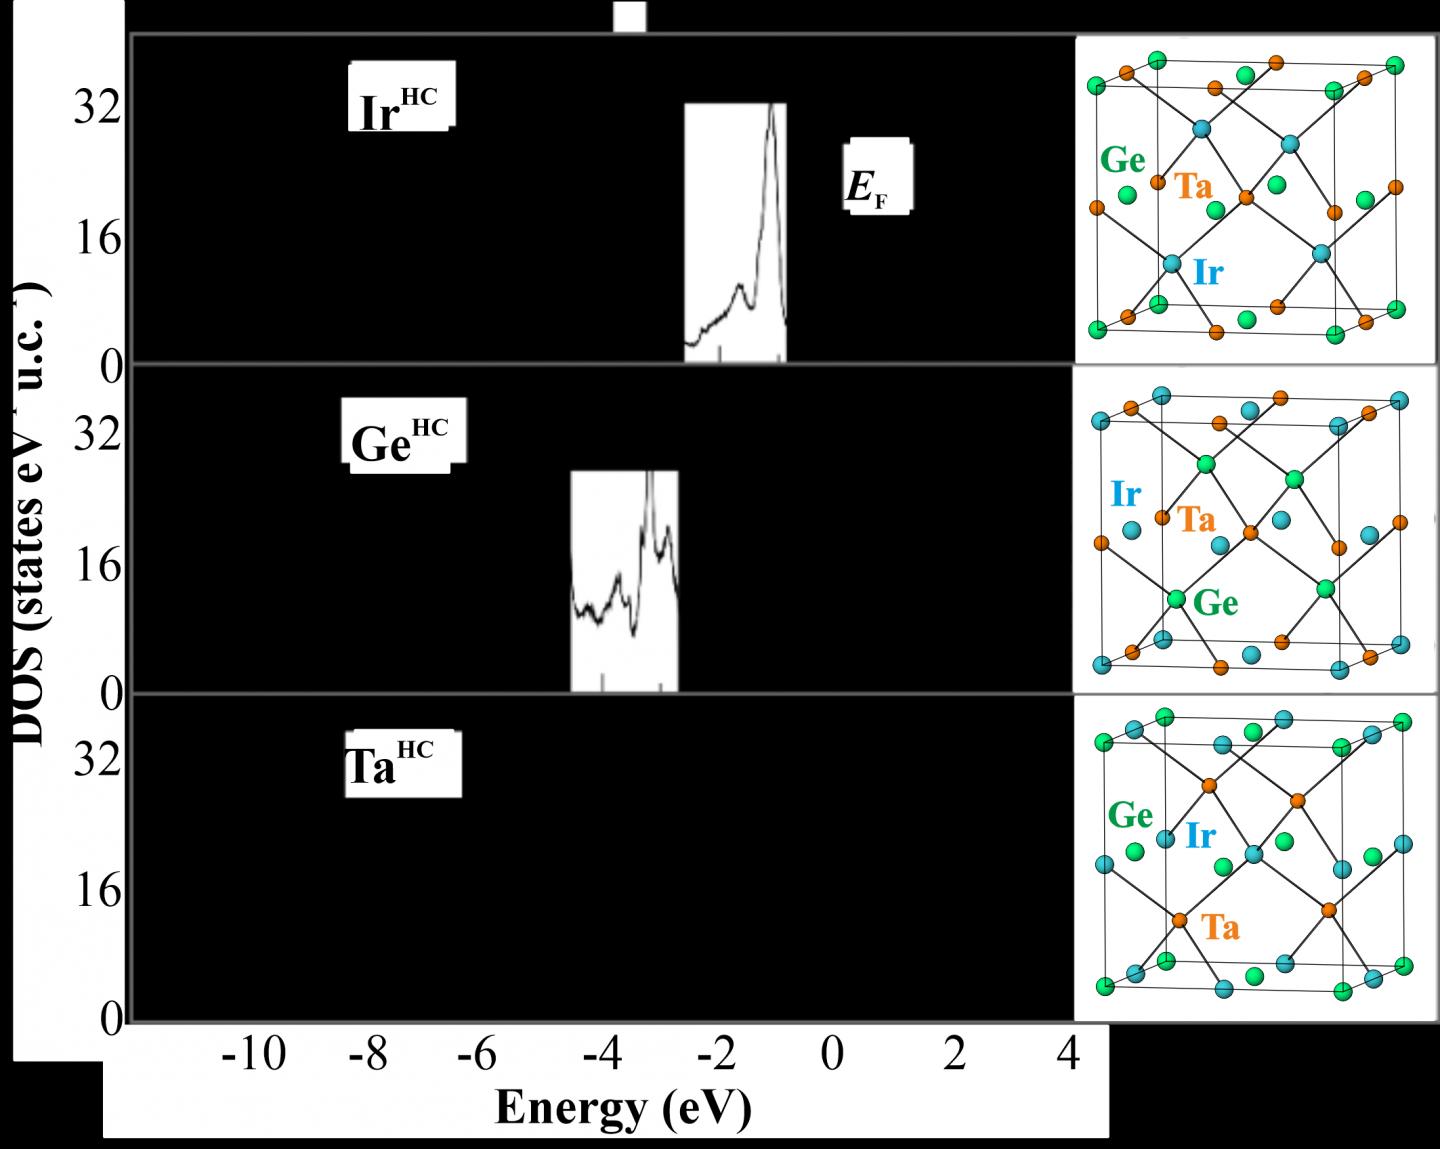 Electronic density of states of optimized TaGeIr models